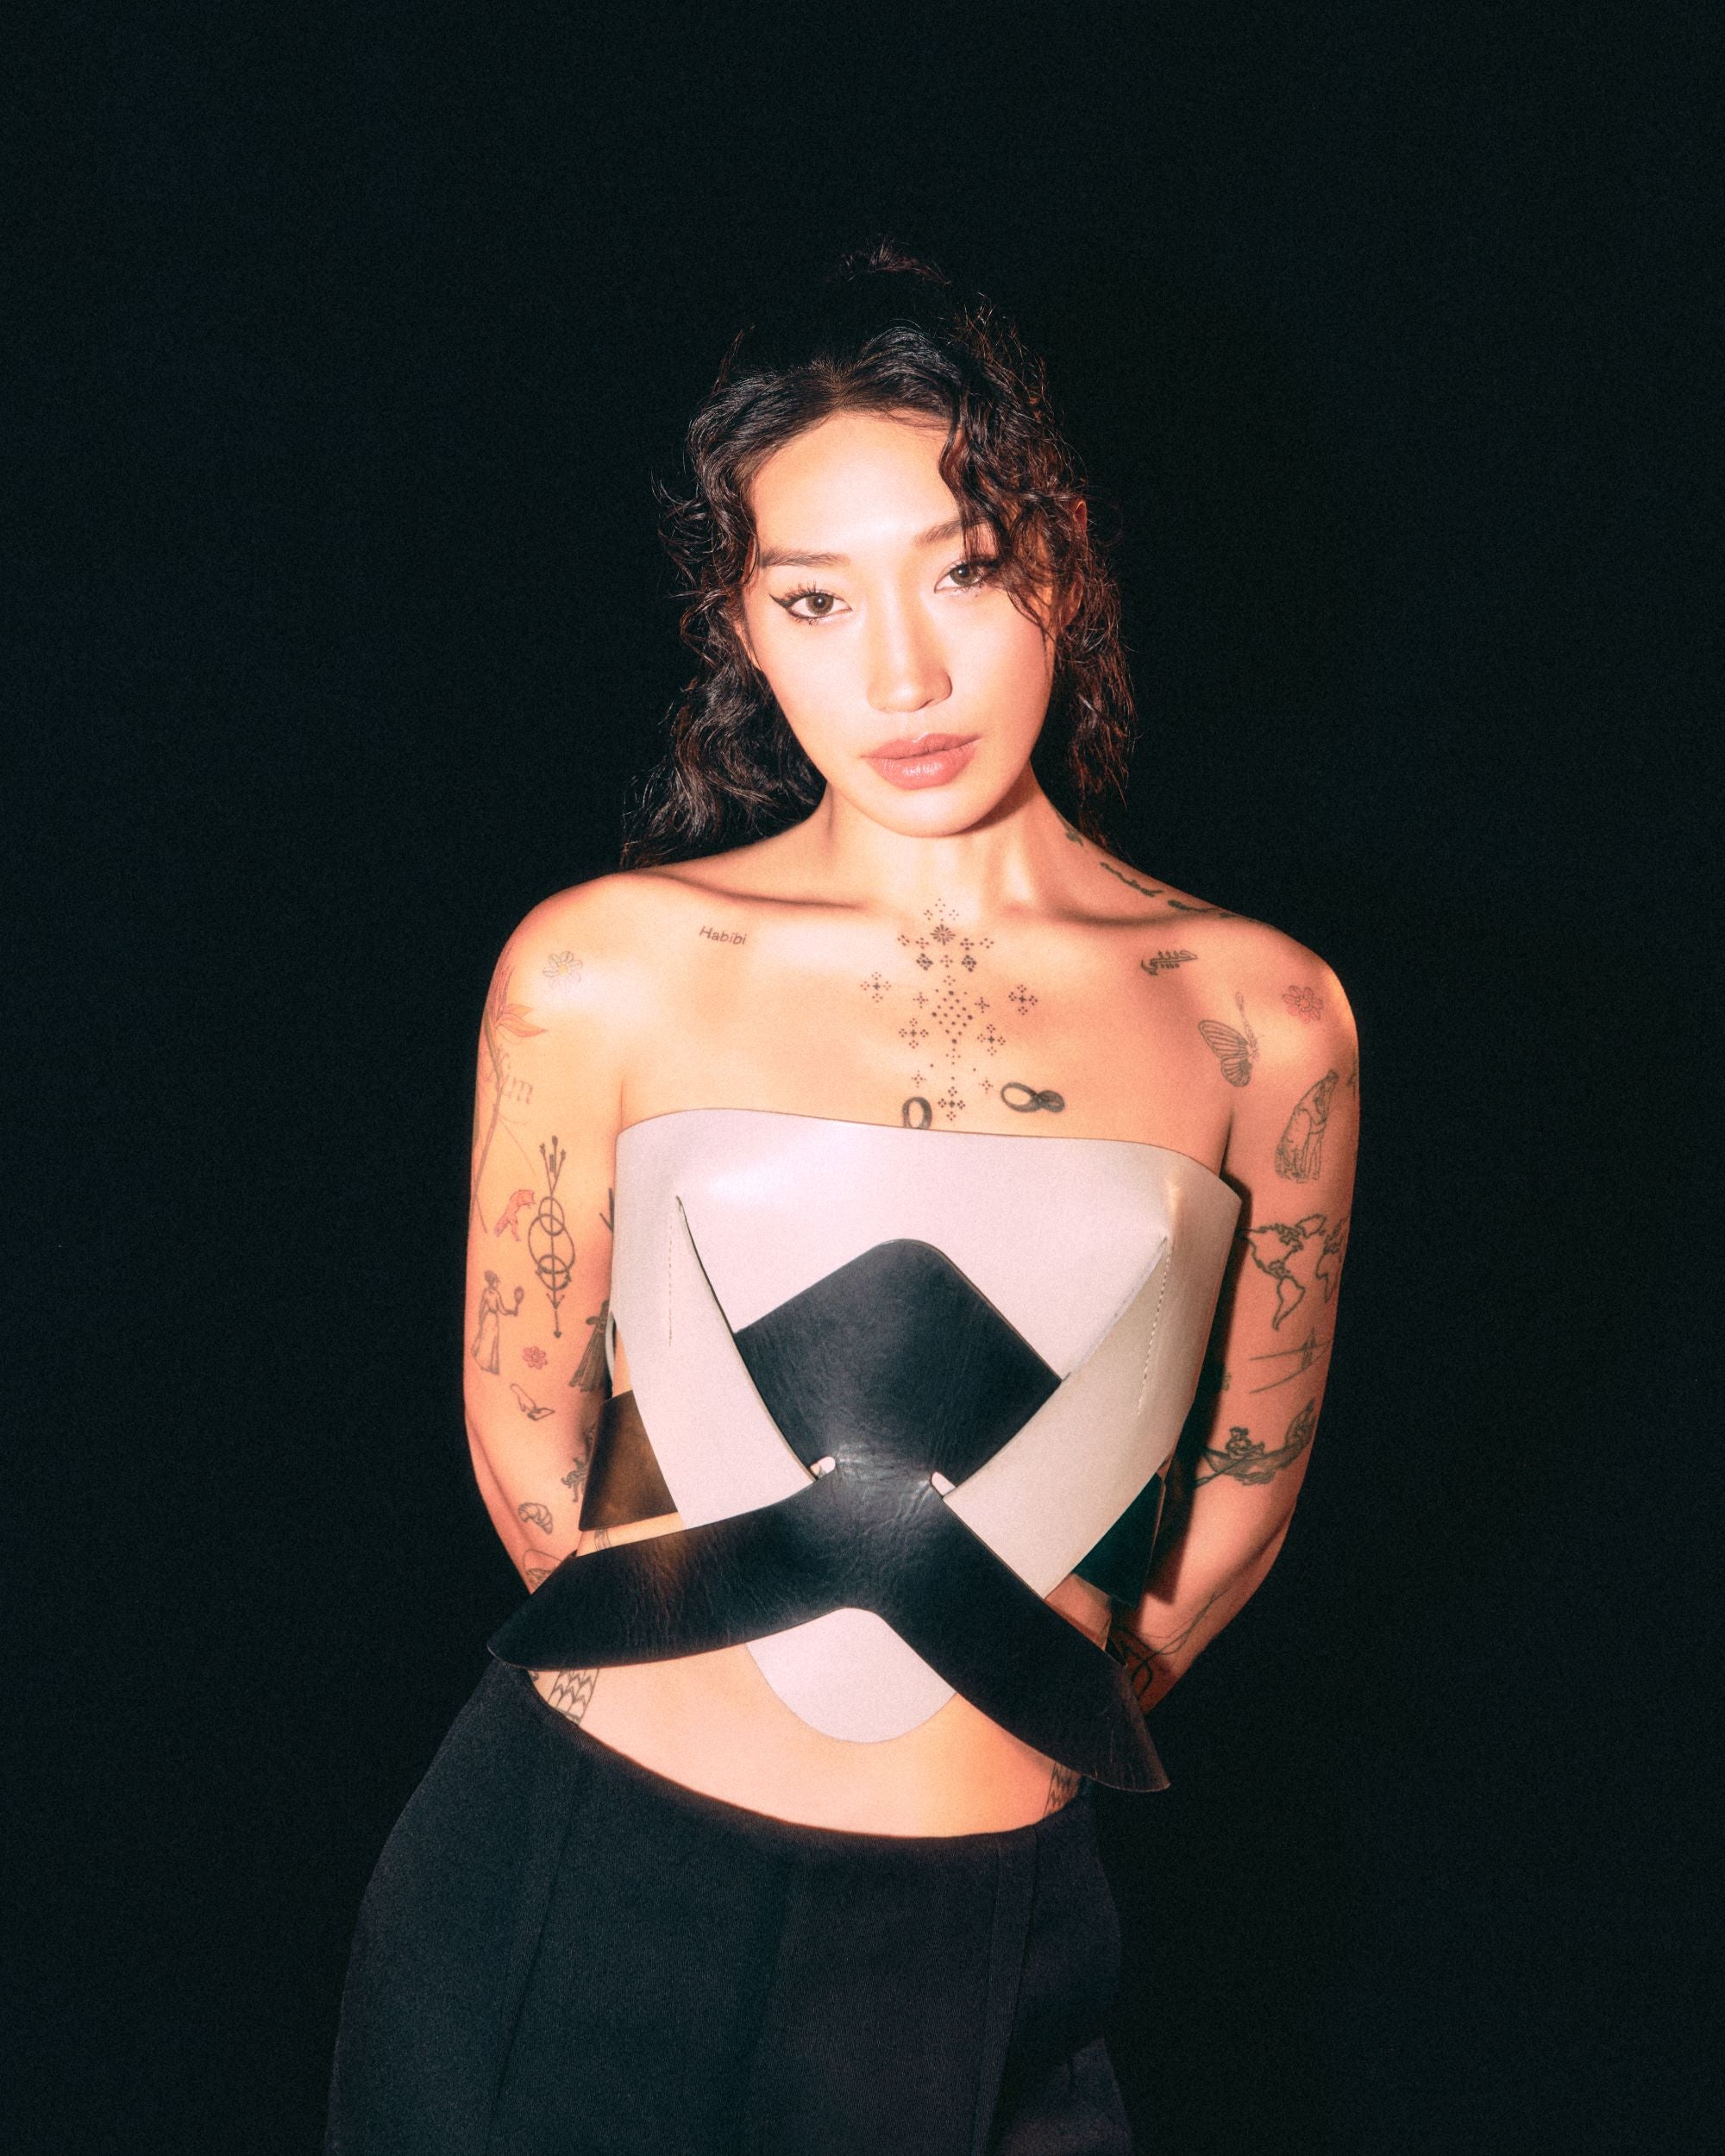 PEGGY GOU plus special guests Mochakk, LSDXOXO, Sally C + Hiver in London promo photo for Priority from O2 presale offer code